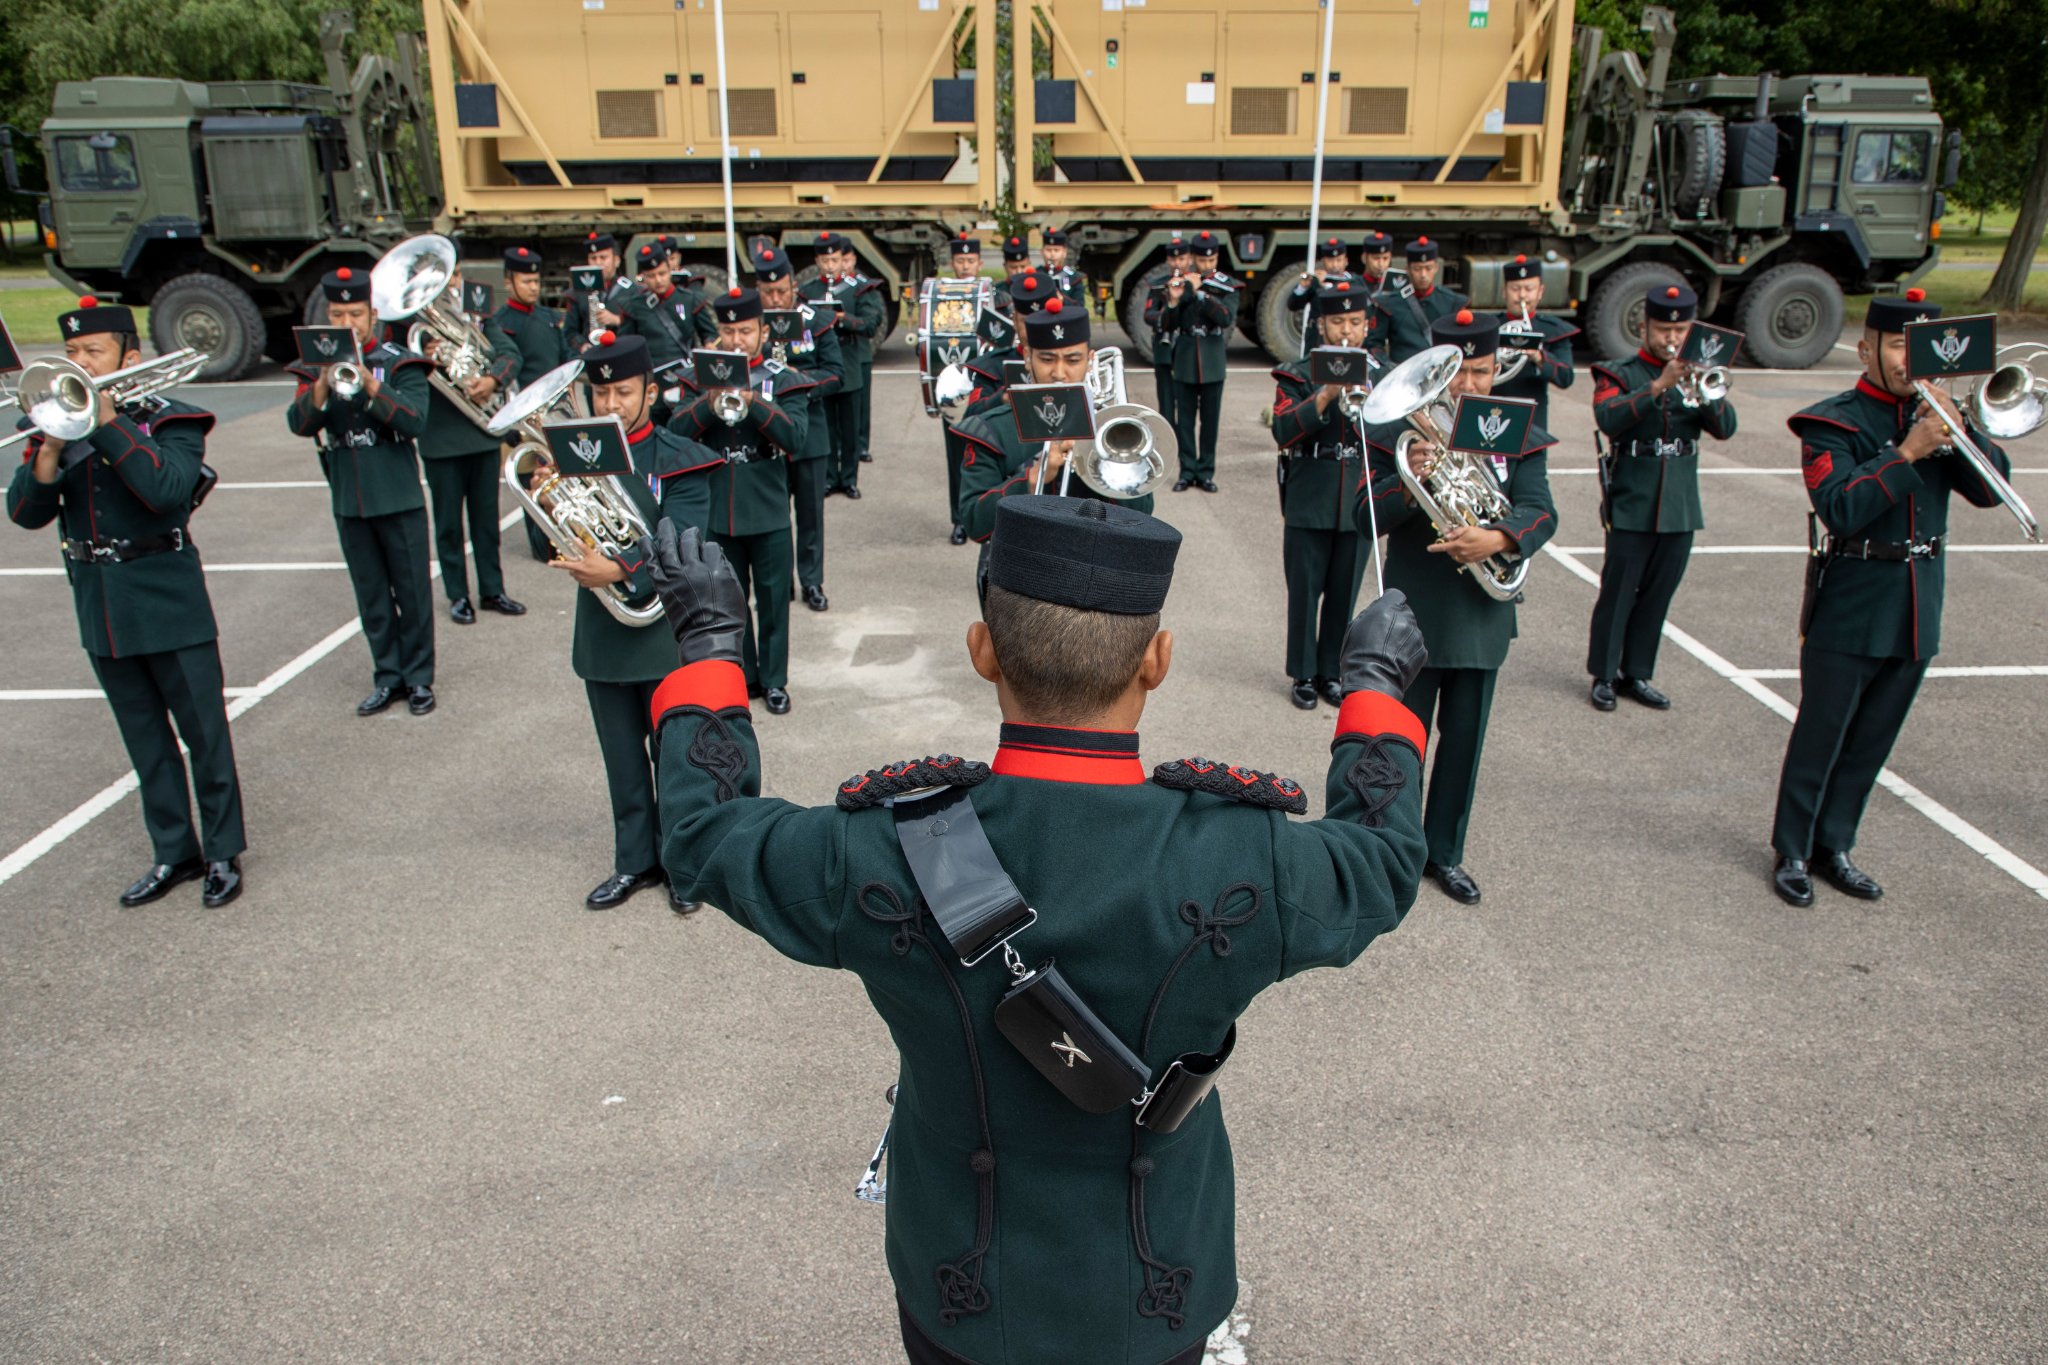 The Band of the Brigade of Gurkhas